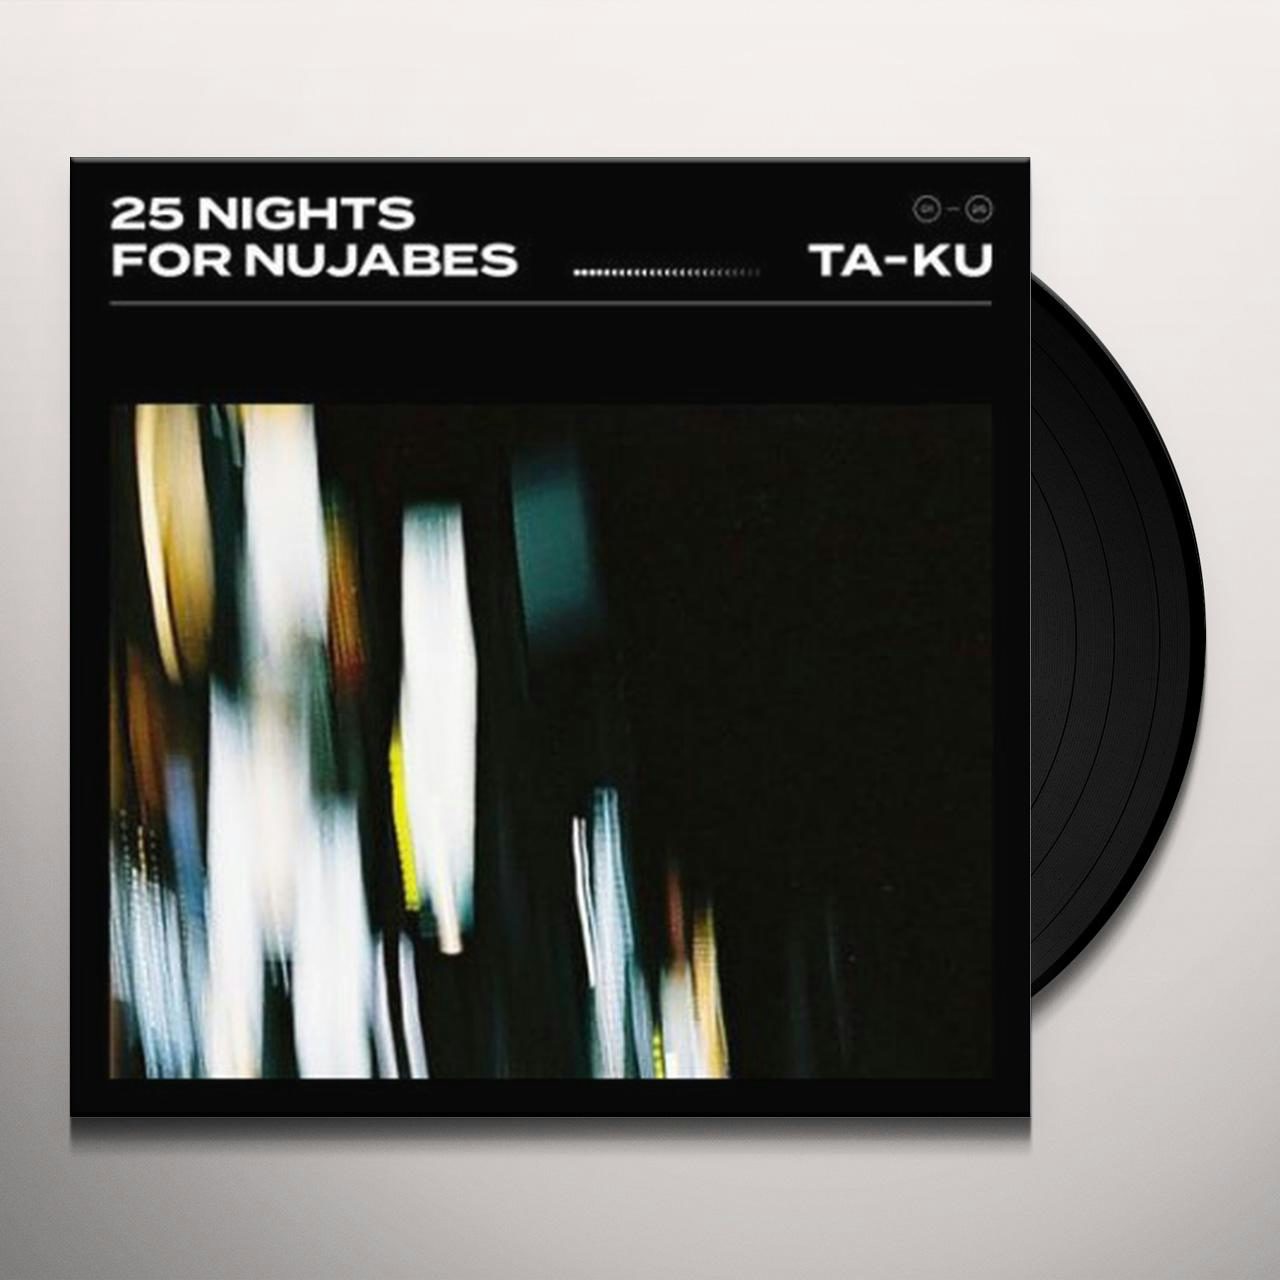 25 Nights for Nujabes Vinyl Record - Ta-ku